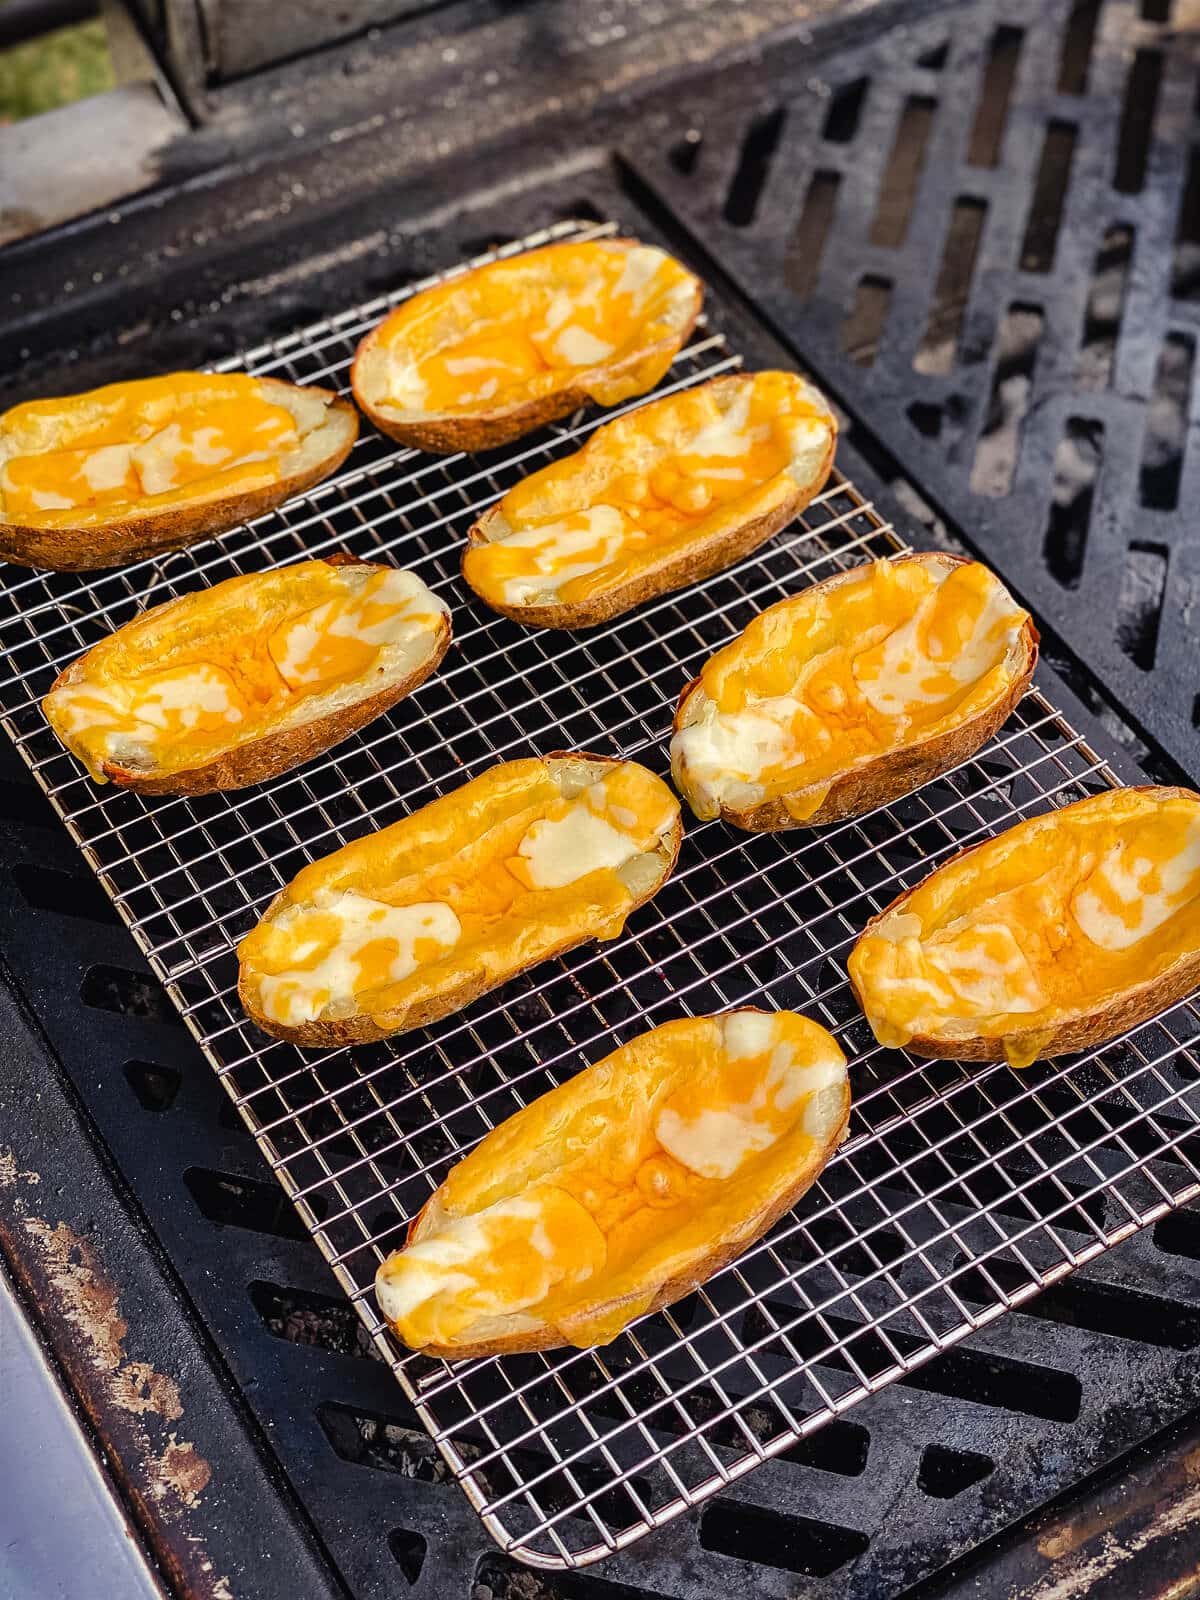 potatoes on a grill with melted cheese